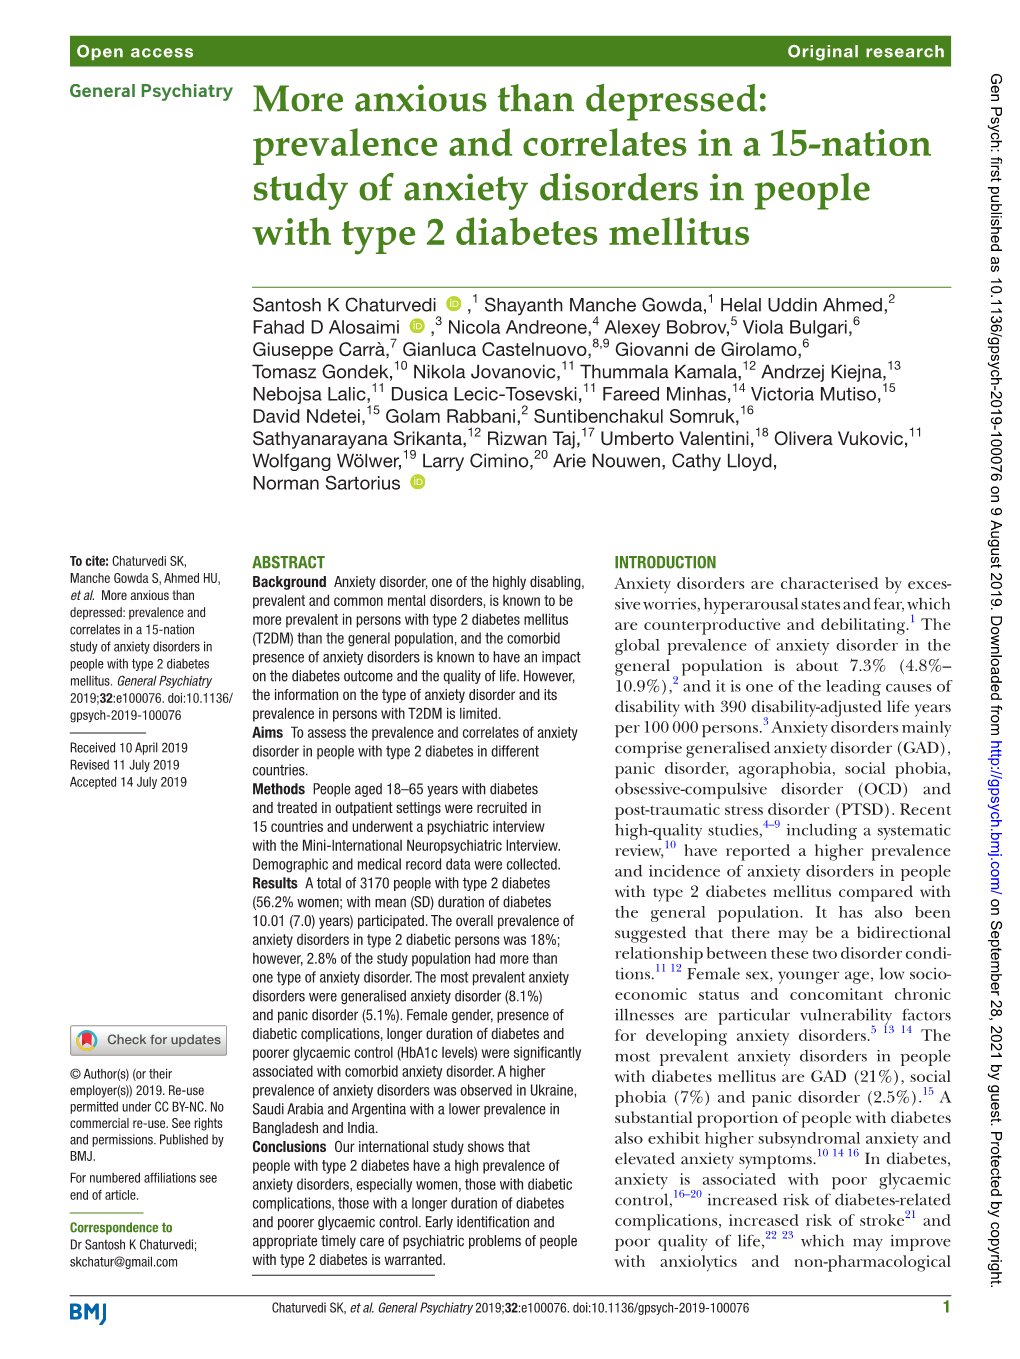 Prevalence and Correlates in a 15-Nation Study of Anxiety Disorders in People with Type 2 Diabetes